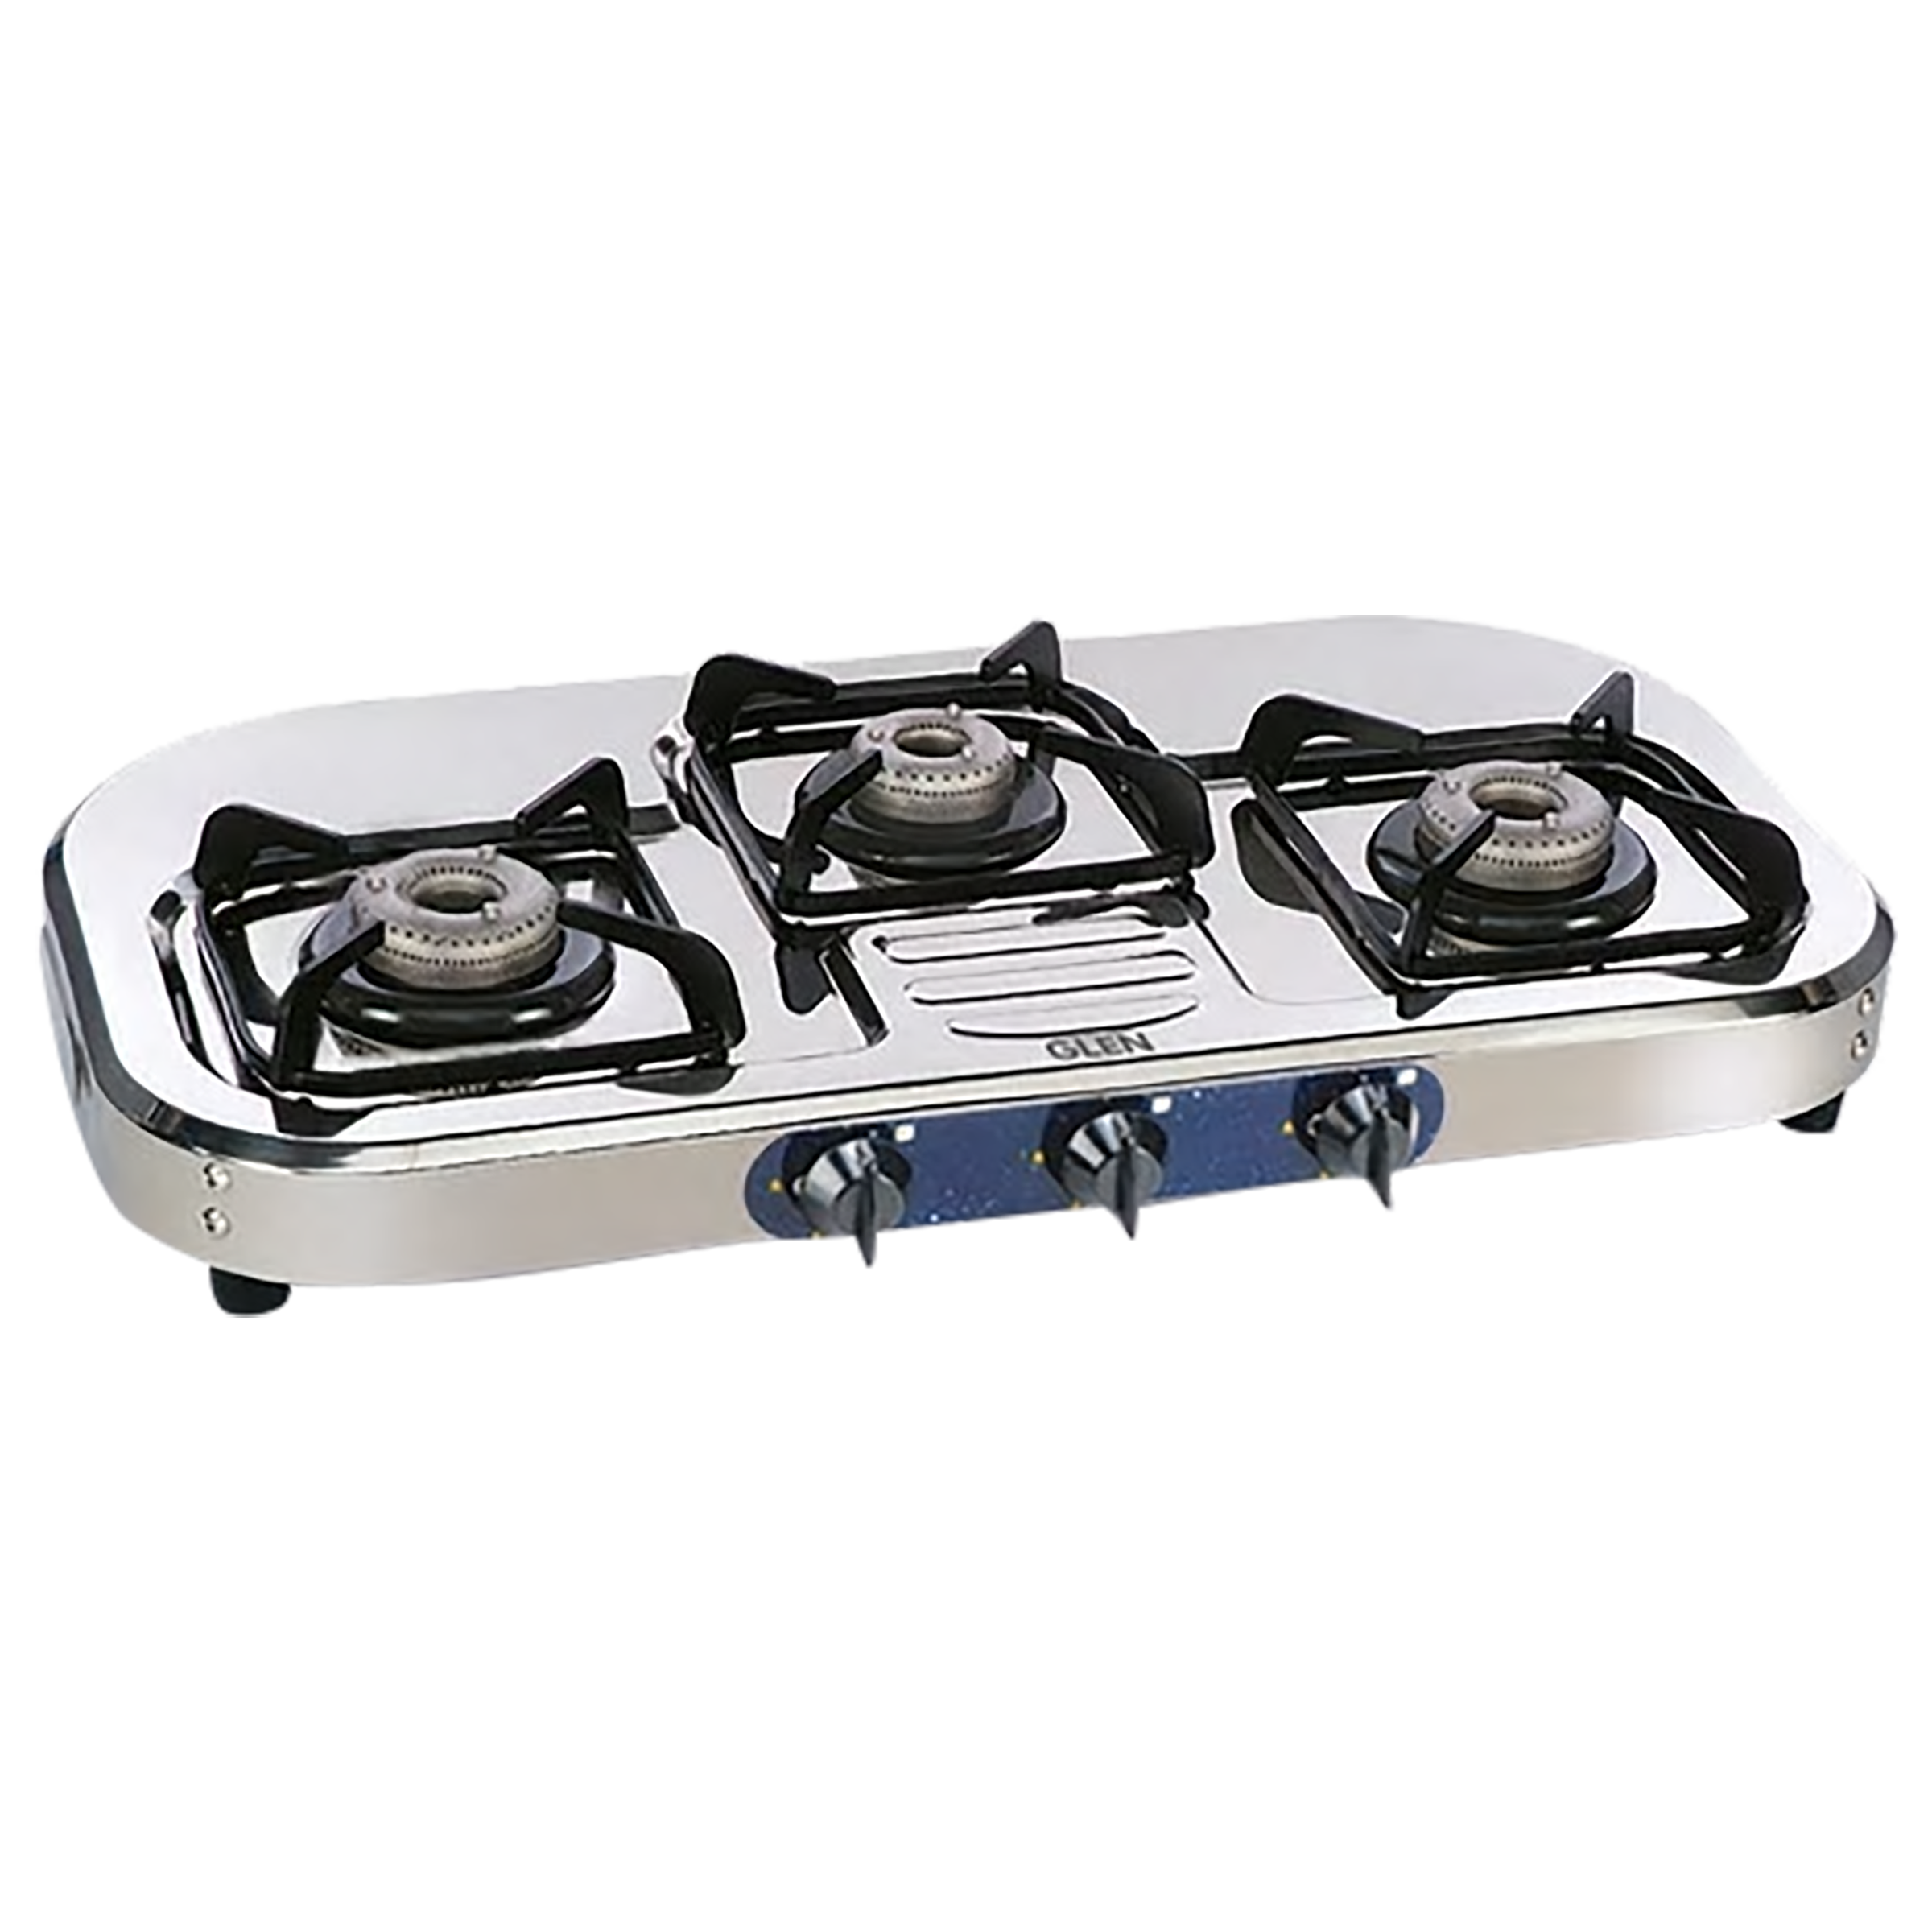 Glen CT1037SSHFBB 3 Burner Stainless Steel Gas Stove (Maximum Cooking Space, Silver)_1